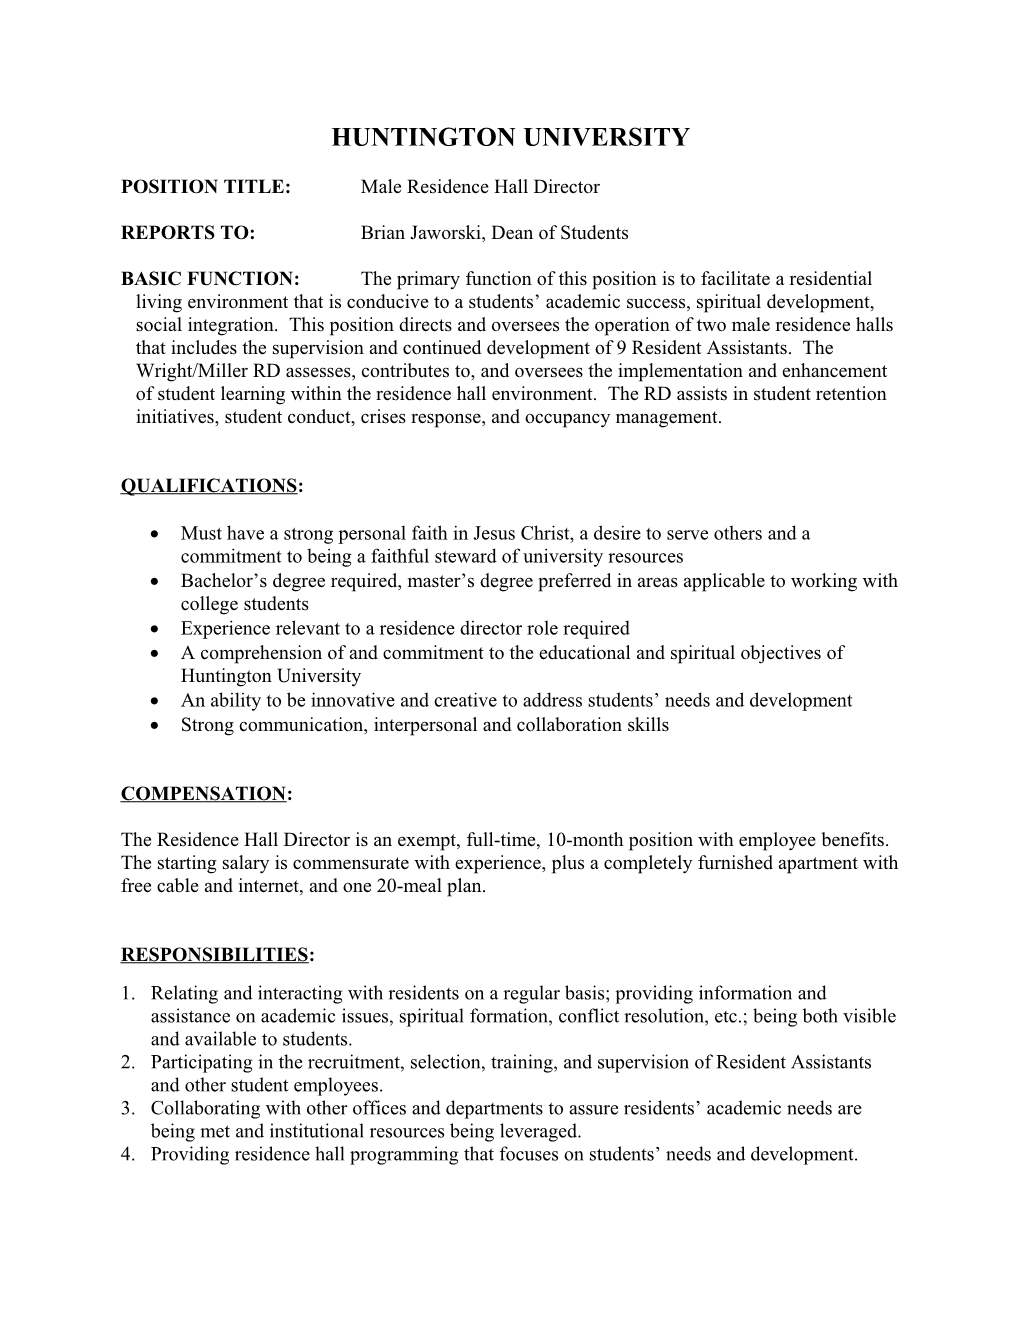 POSITION TITLE:Male Residence Hall Director